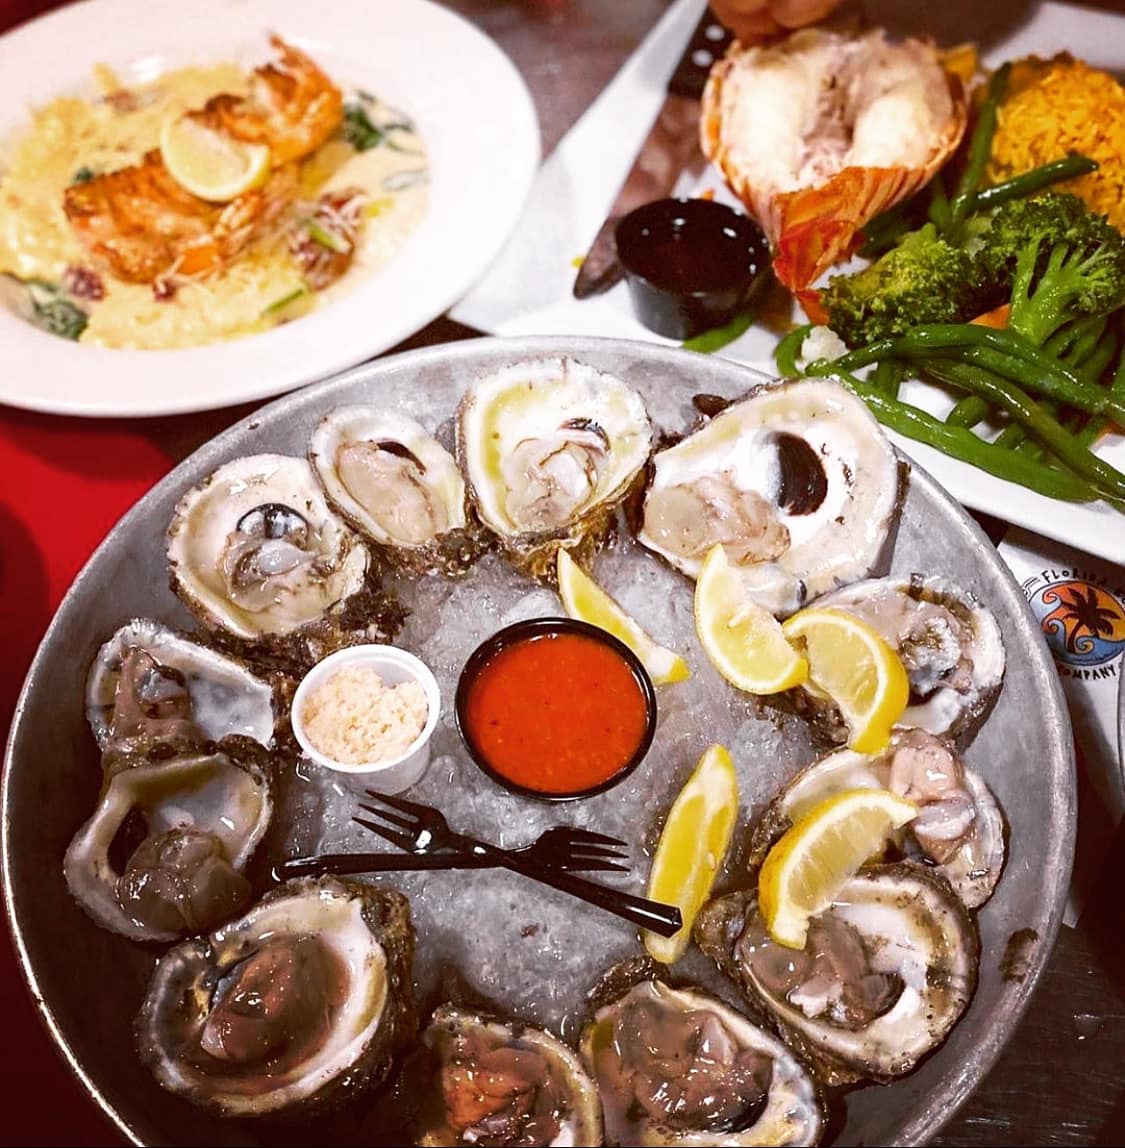 Oysters ✅ Shrimp ✅ Lobster ✅

Conch Republic Seafood Co. has all your seafood needs covered at the Key West #HistoricSeaport 🌊

📸: @conchfarm